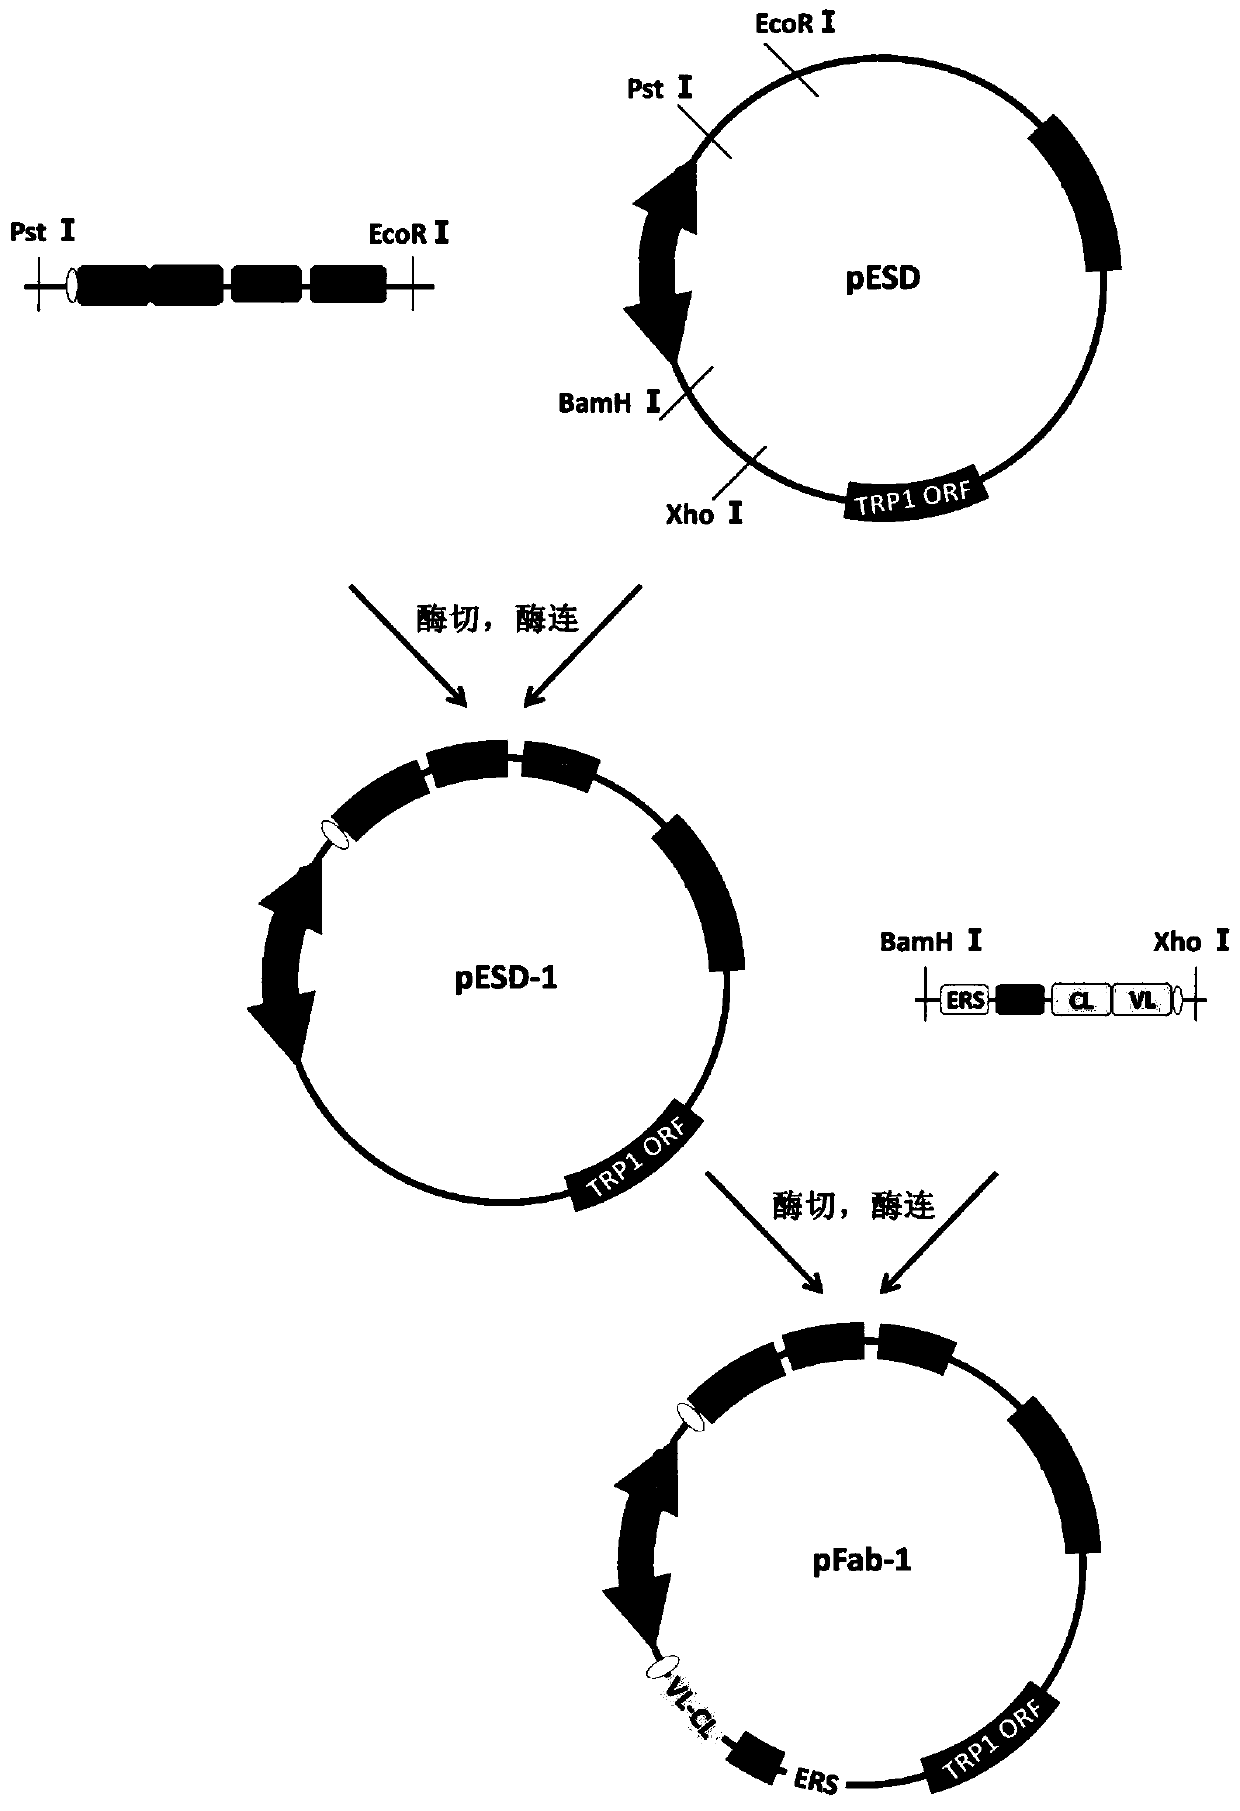 Recombinant vector for enhancing ability of displaying Fab fragment antigen binding on yeast cell surface by using endoplasmic reticulum retrieval signal sequence